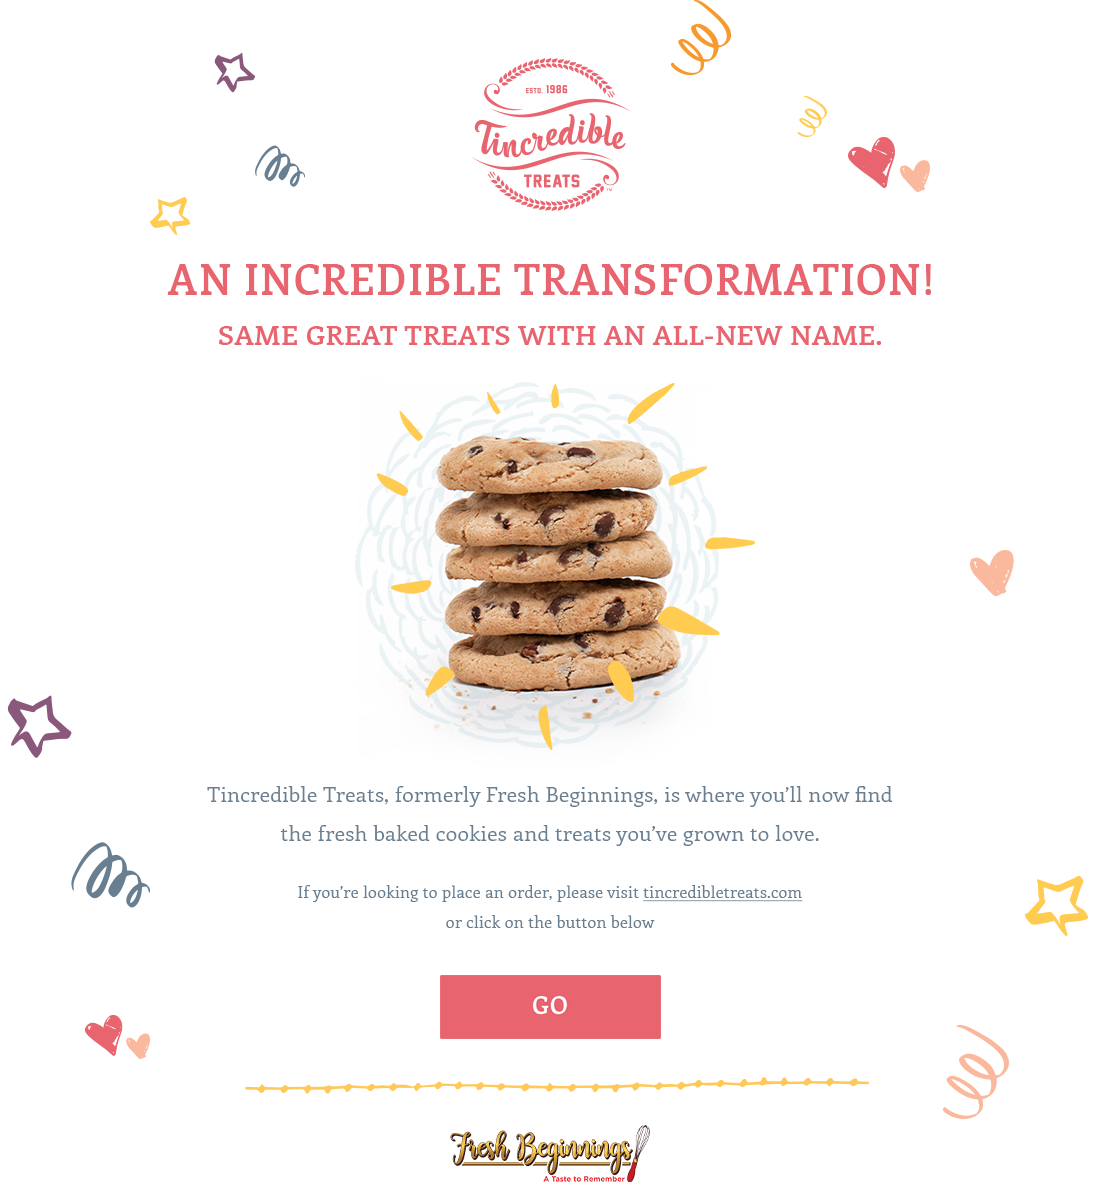 Image of Cookies and introduction to tincredibletreats.com